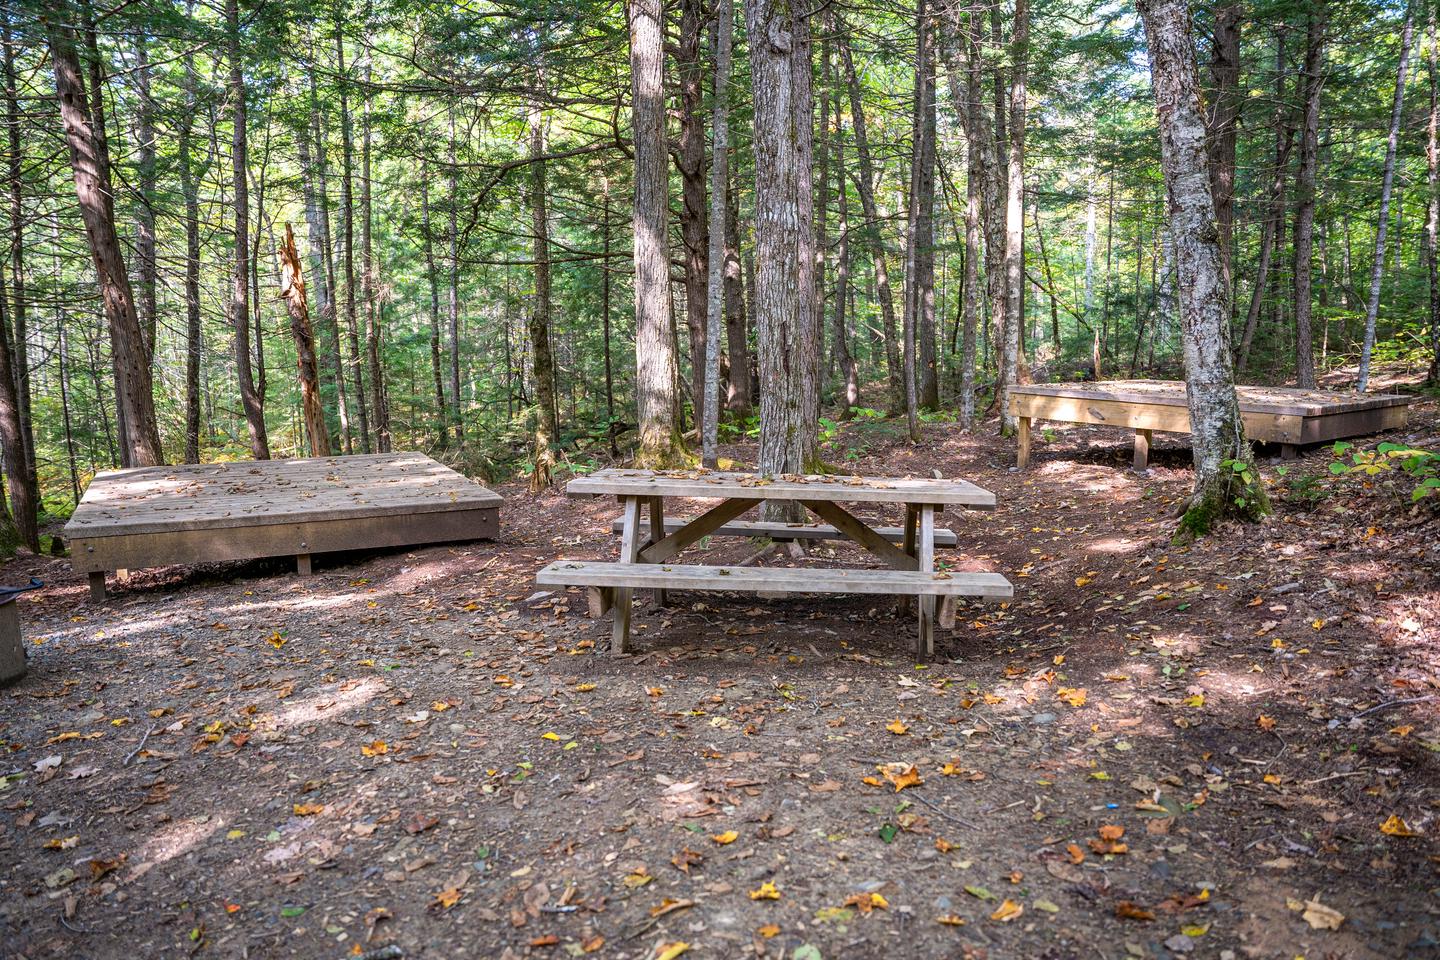 Two raised square wooden platforms with a wooden picnic table in front of them. The platforms are on dirt surfaces while the picnic area has gravel. A green dense forest is behind the campsite.Enjoy the shaded space of group campsite 7.